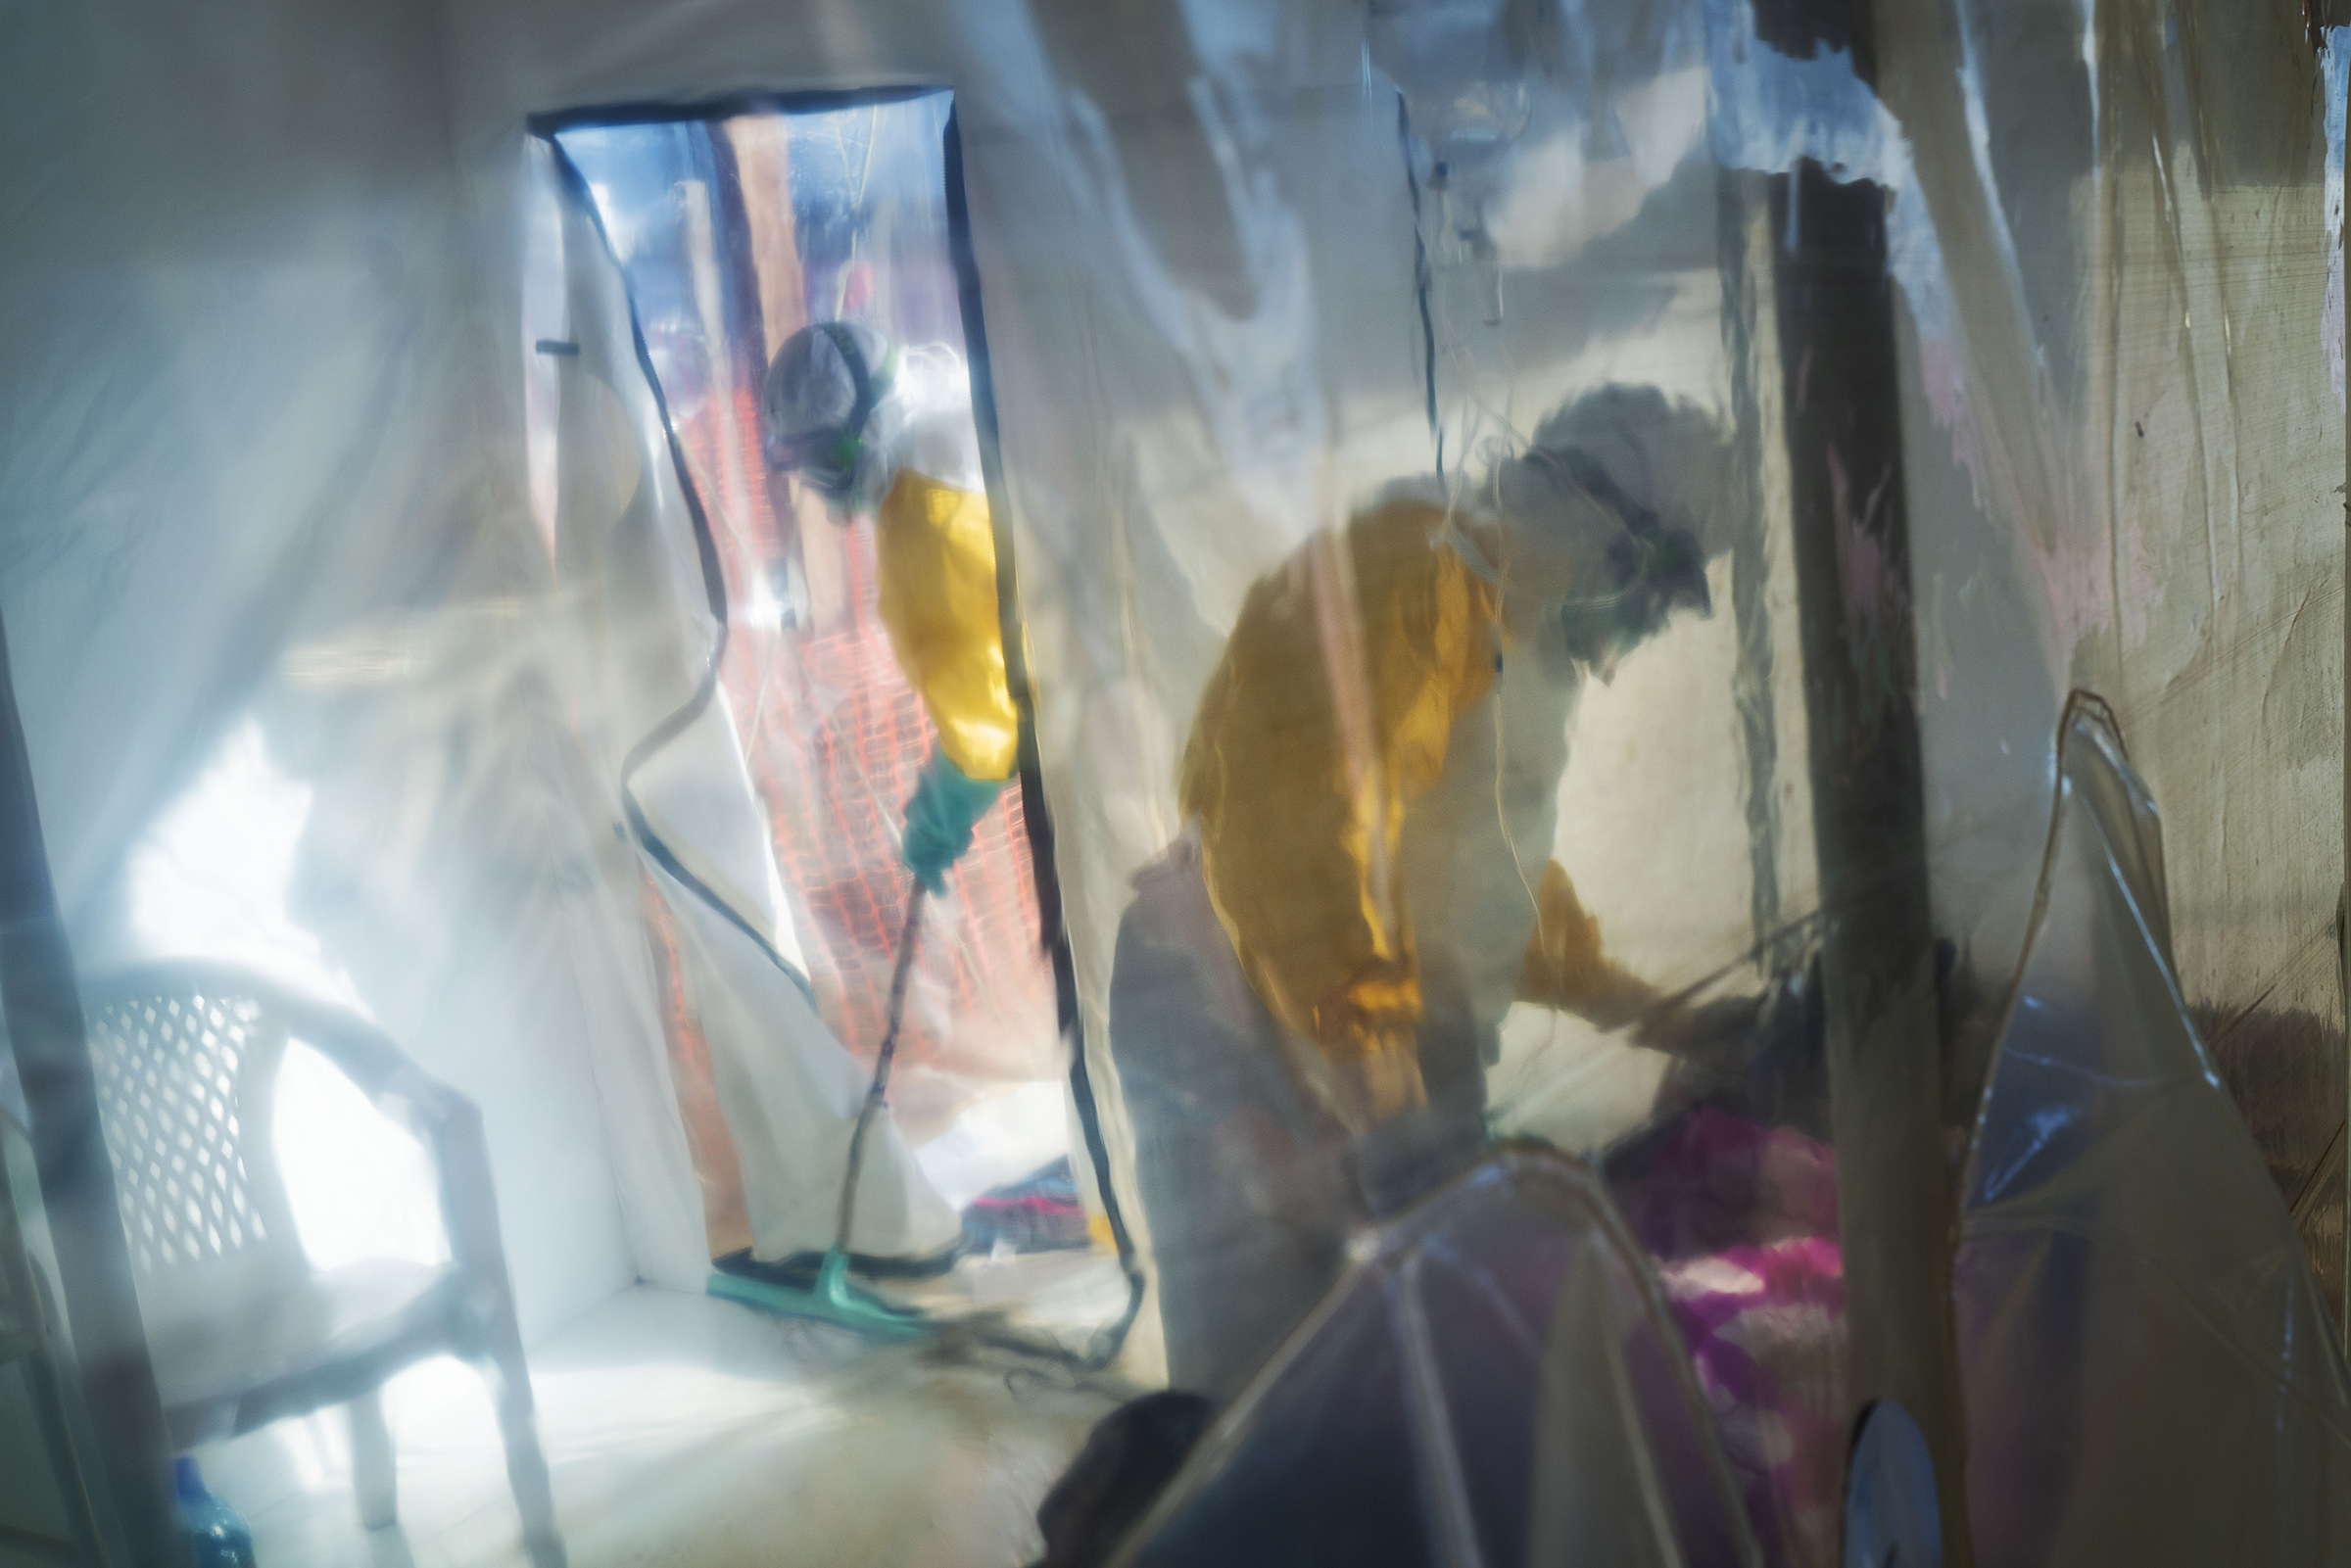 Health workers wearing protective suits tend to an Ebola victim kept in an isolation cube in Beni, Congo on March 13, 2019. (Jerome Delay—AP)